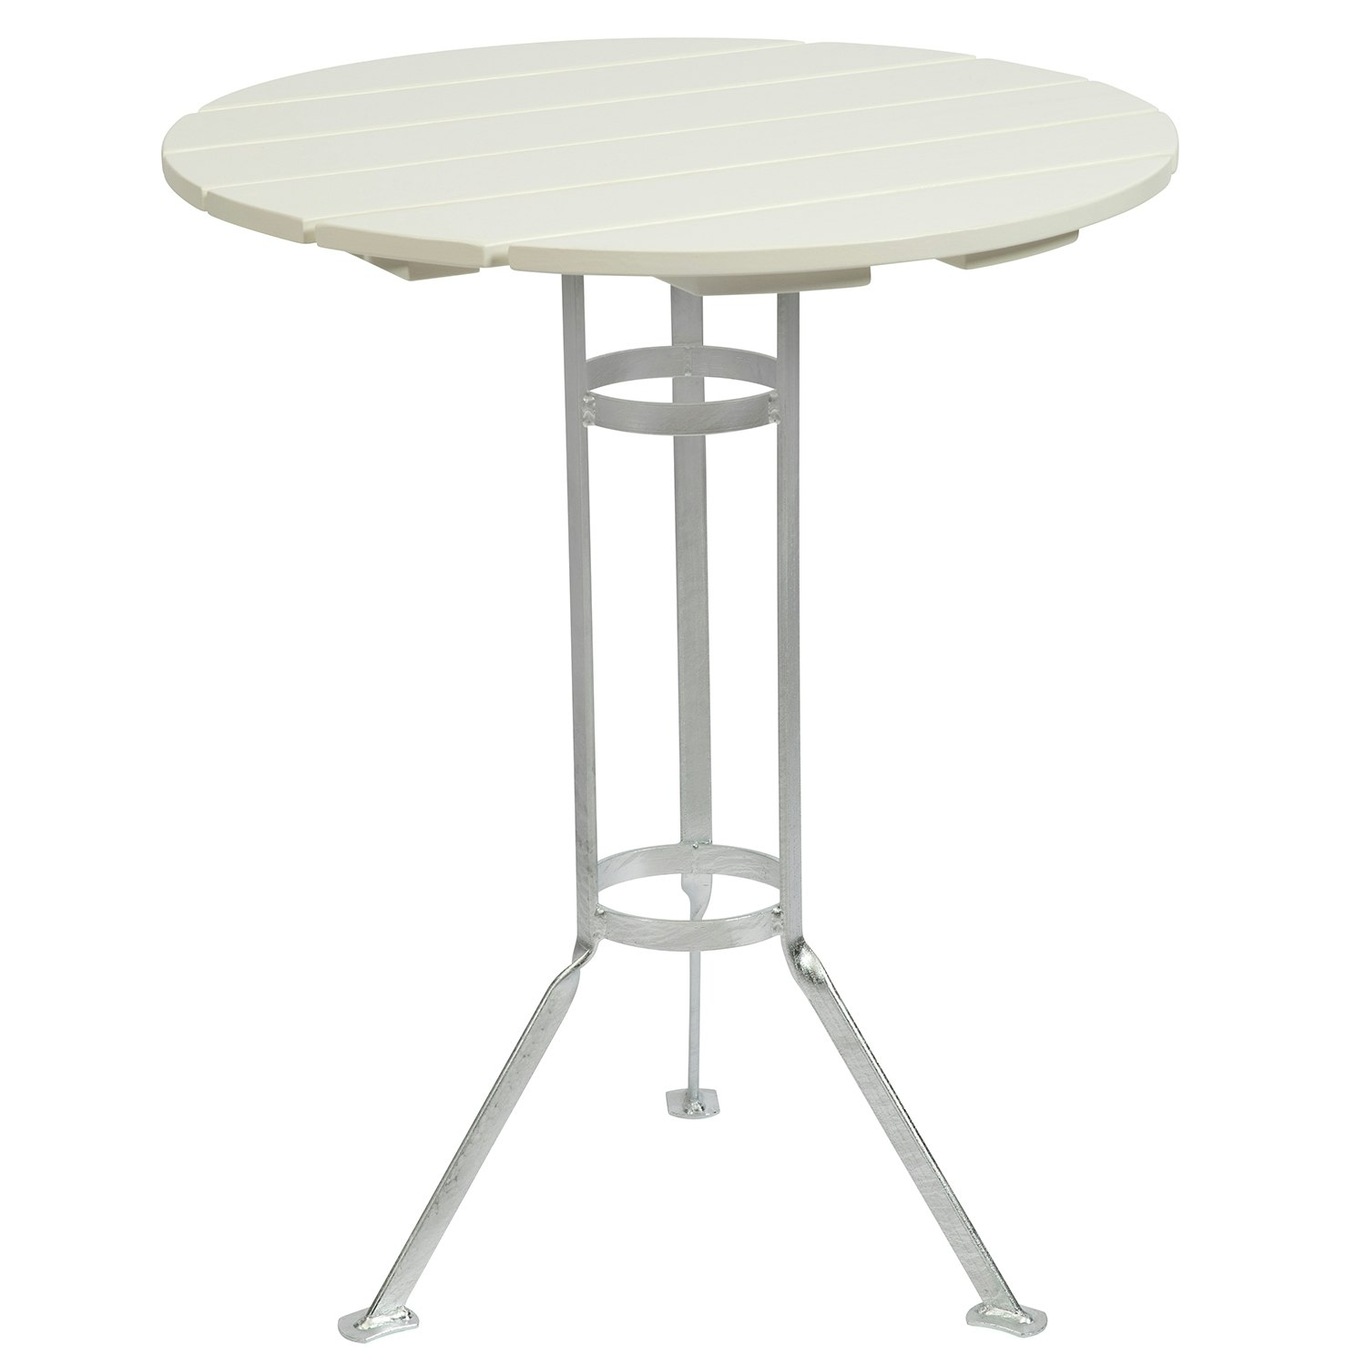 Brewery Table Ø60 cm, White Lacquered Oak / Hot Galvanized Steel